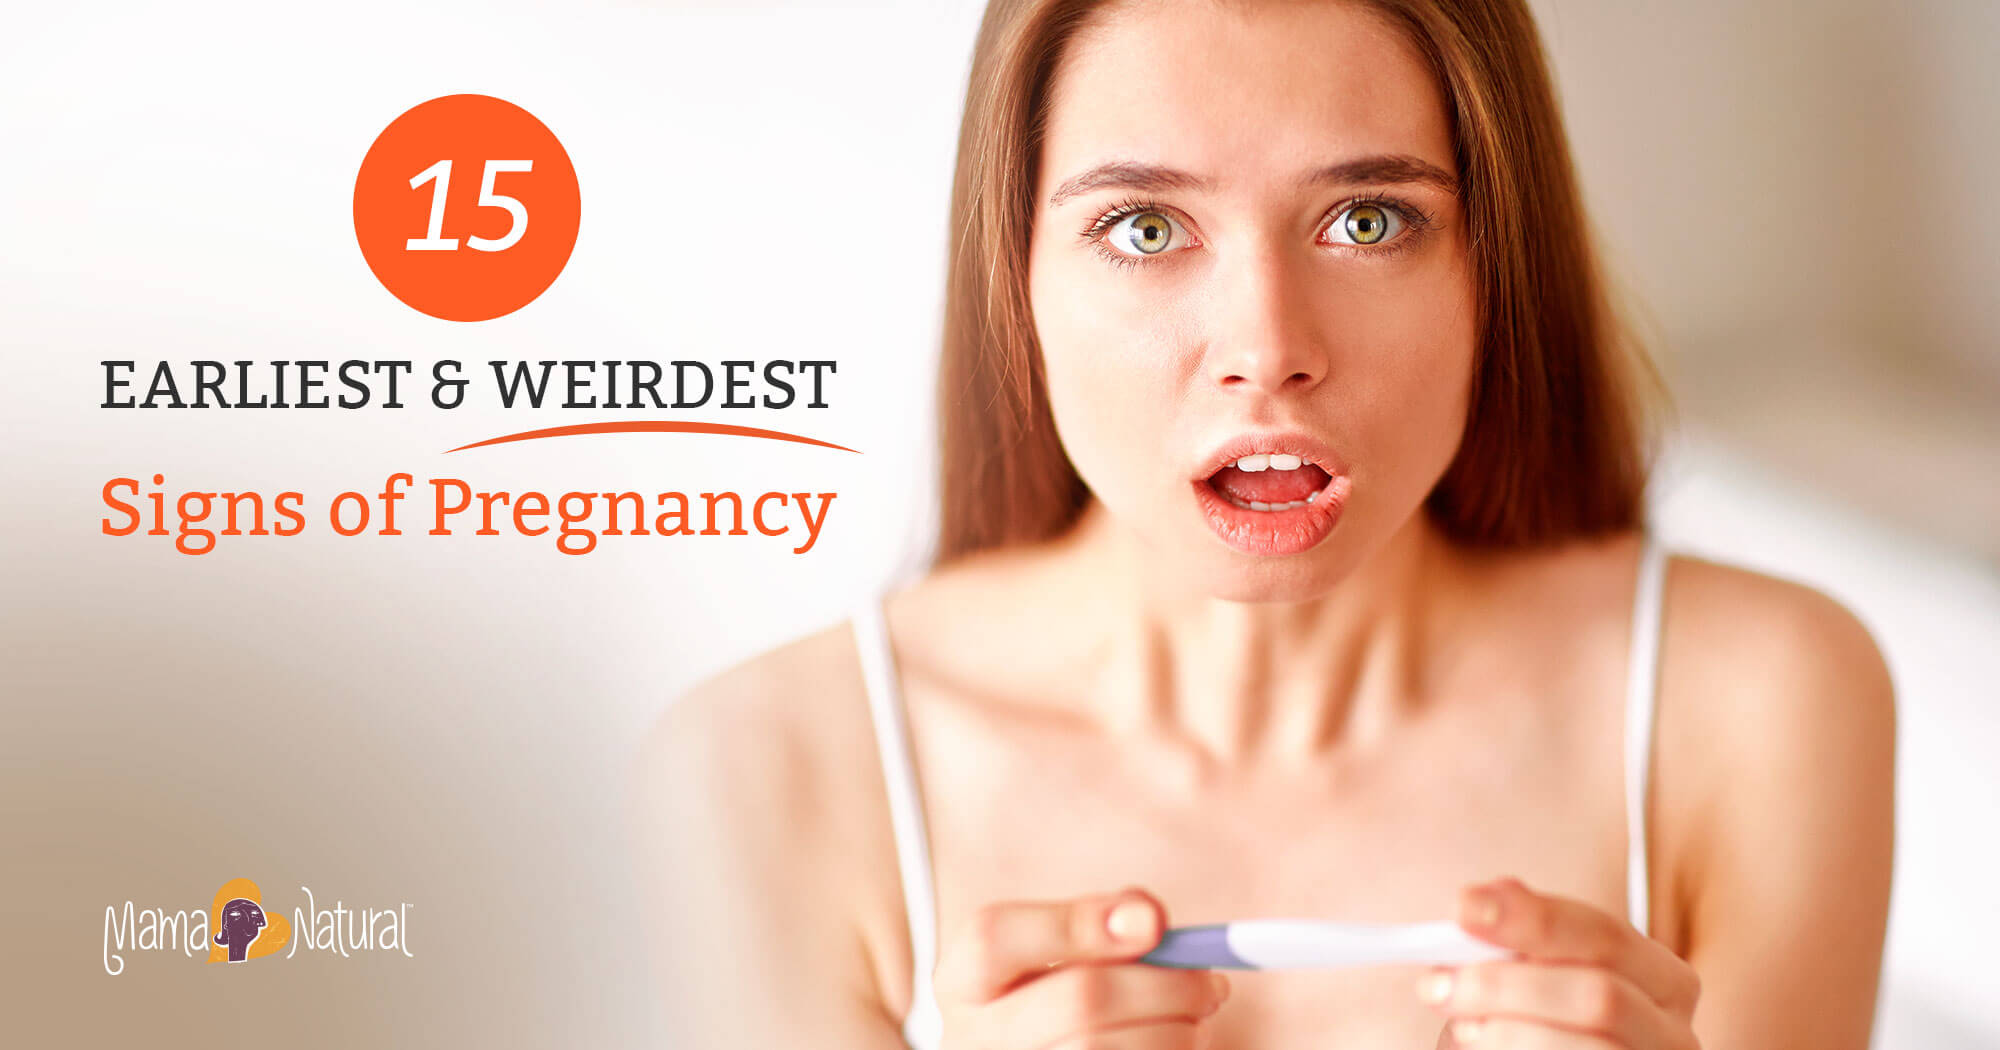 Can A Dry Mouth Be A Sign Of Pregnancy? 